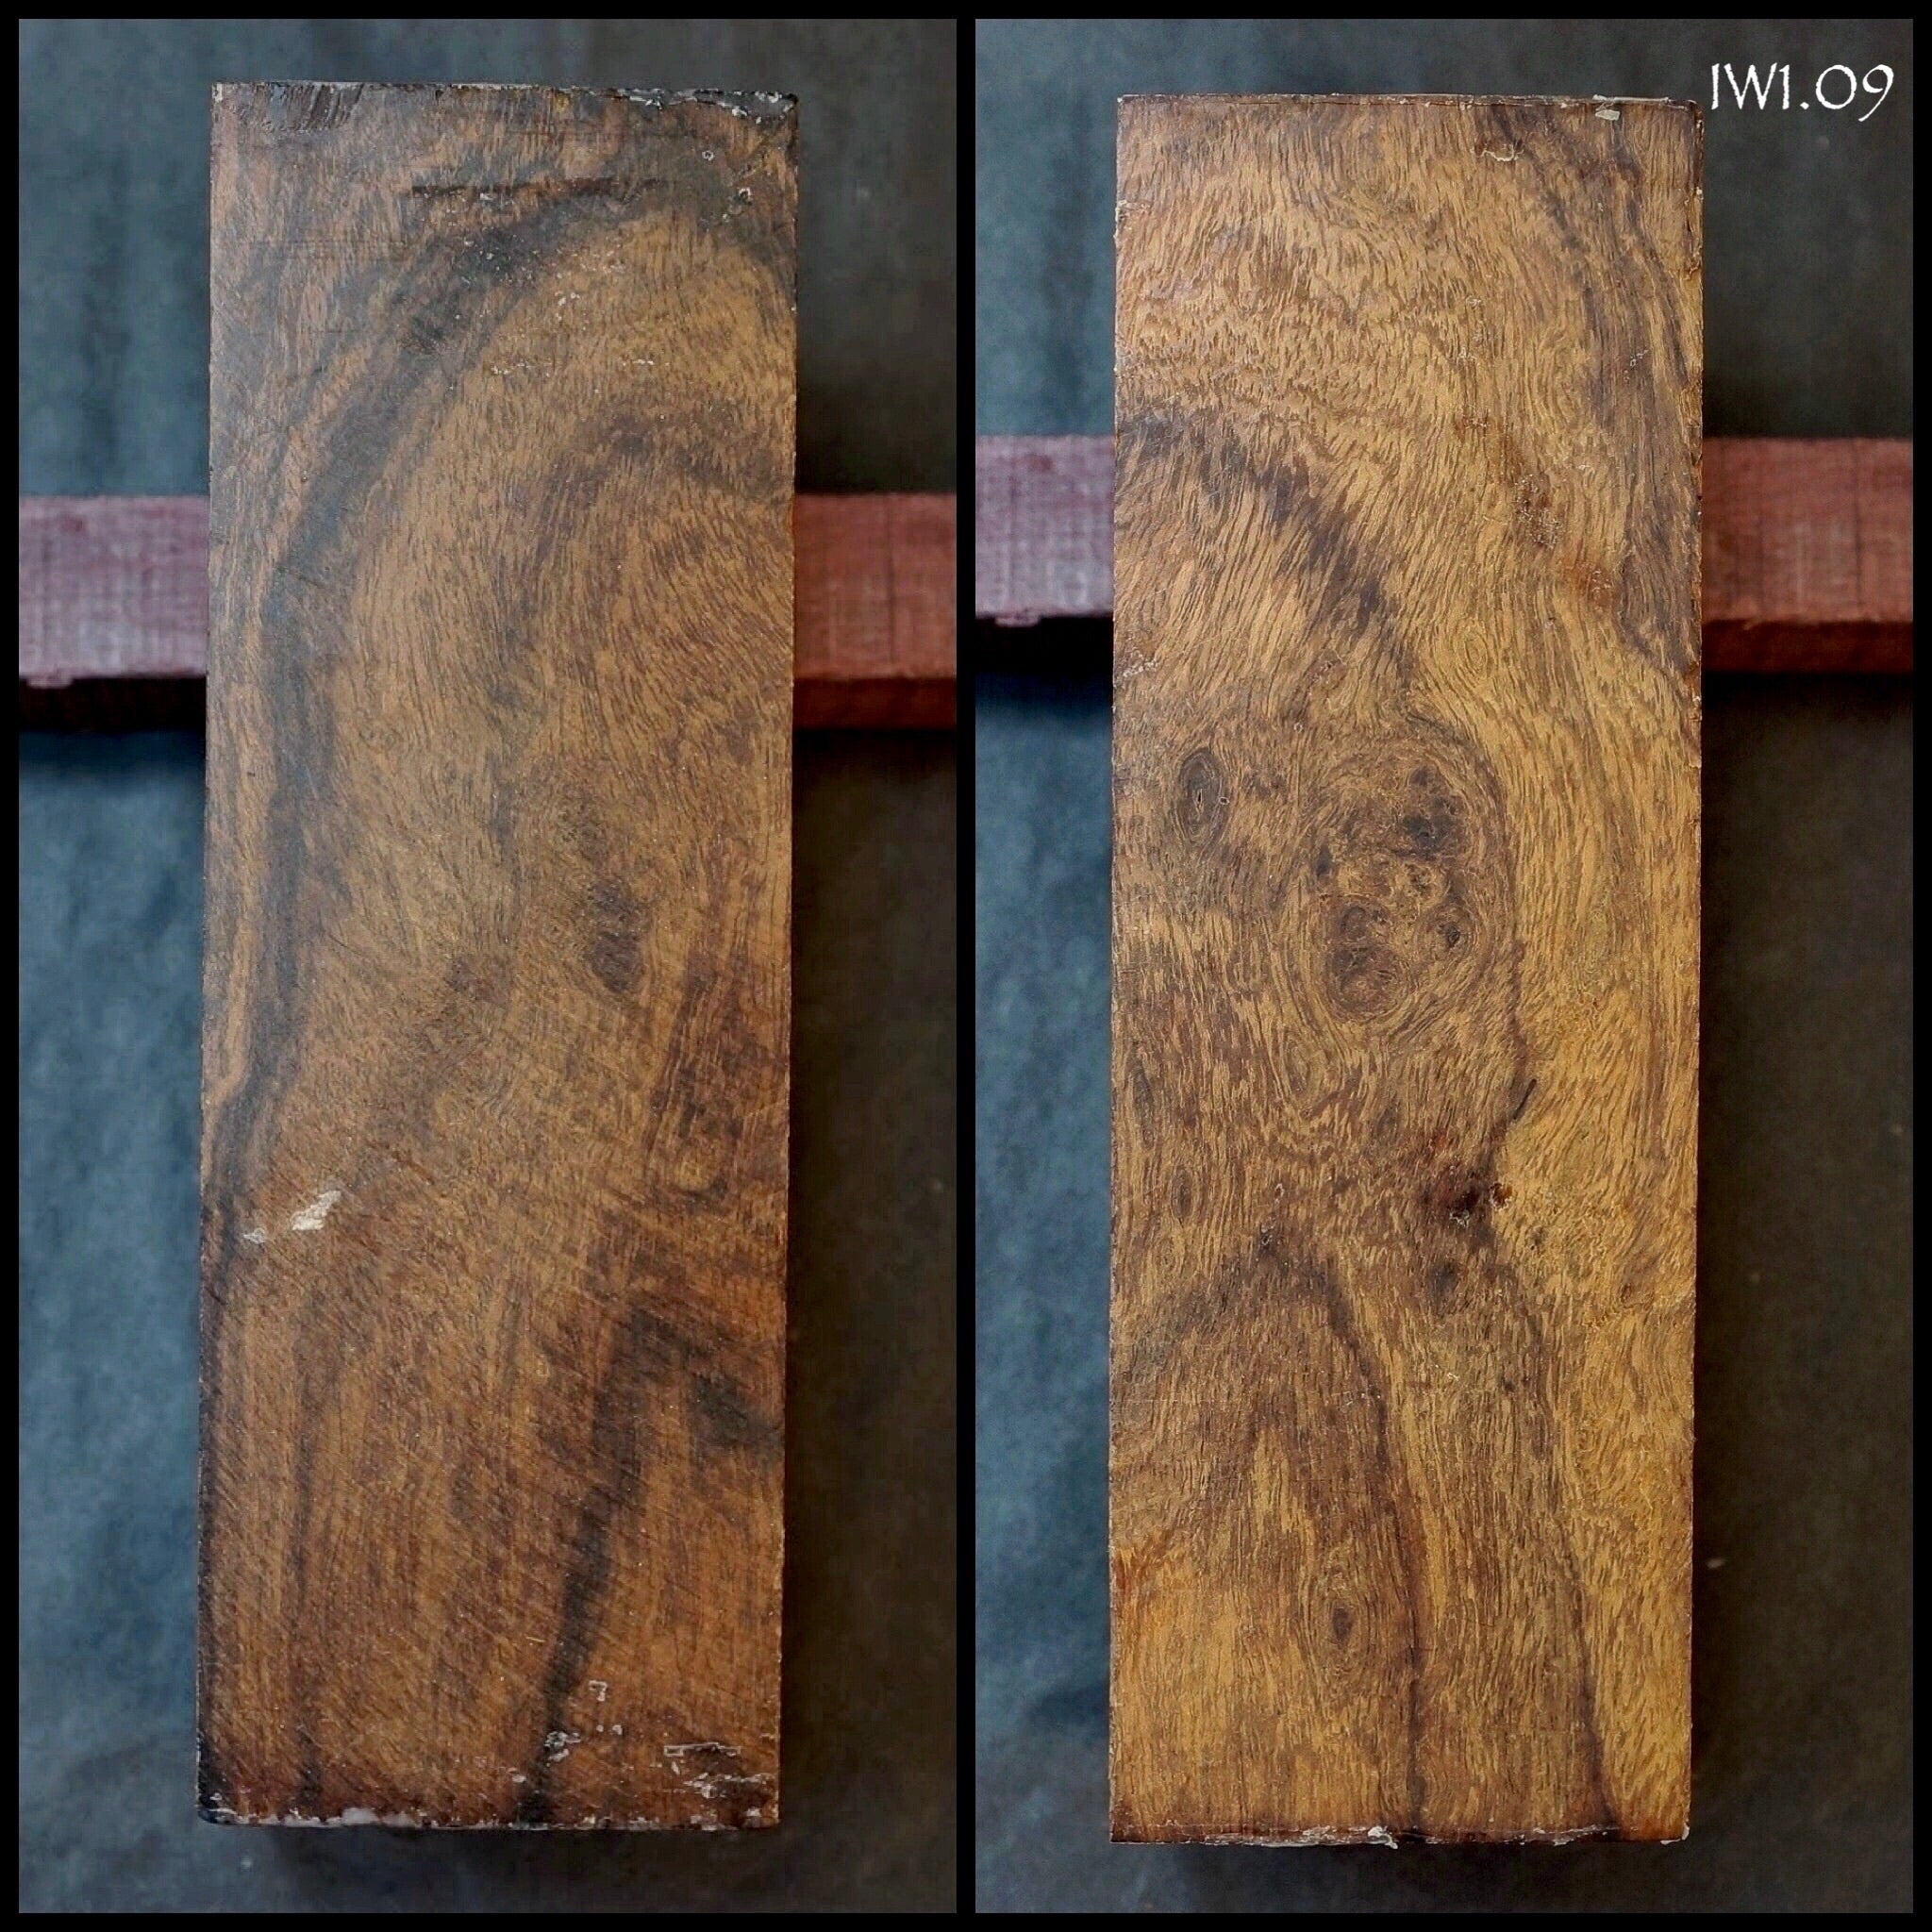 DESERT IRONWOOD Blanks for Crafting, Woodworking, Turning. Grade A+